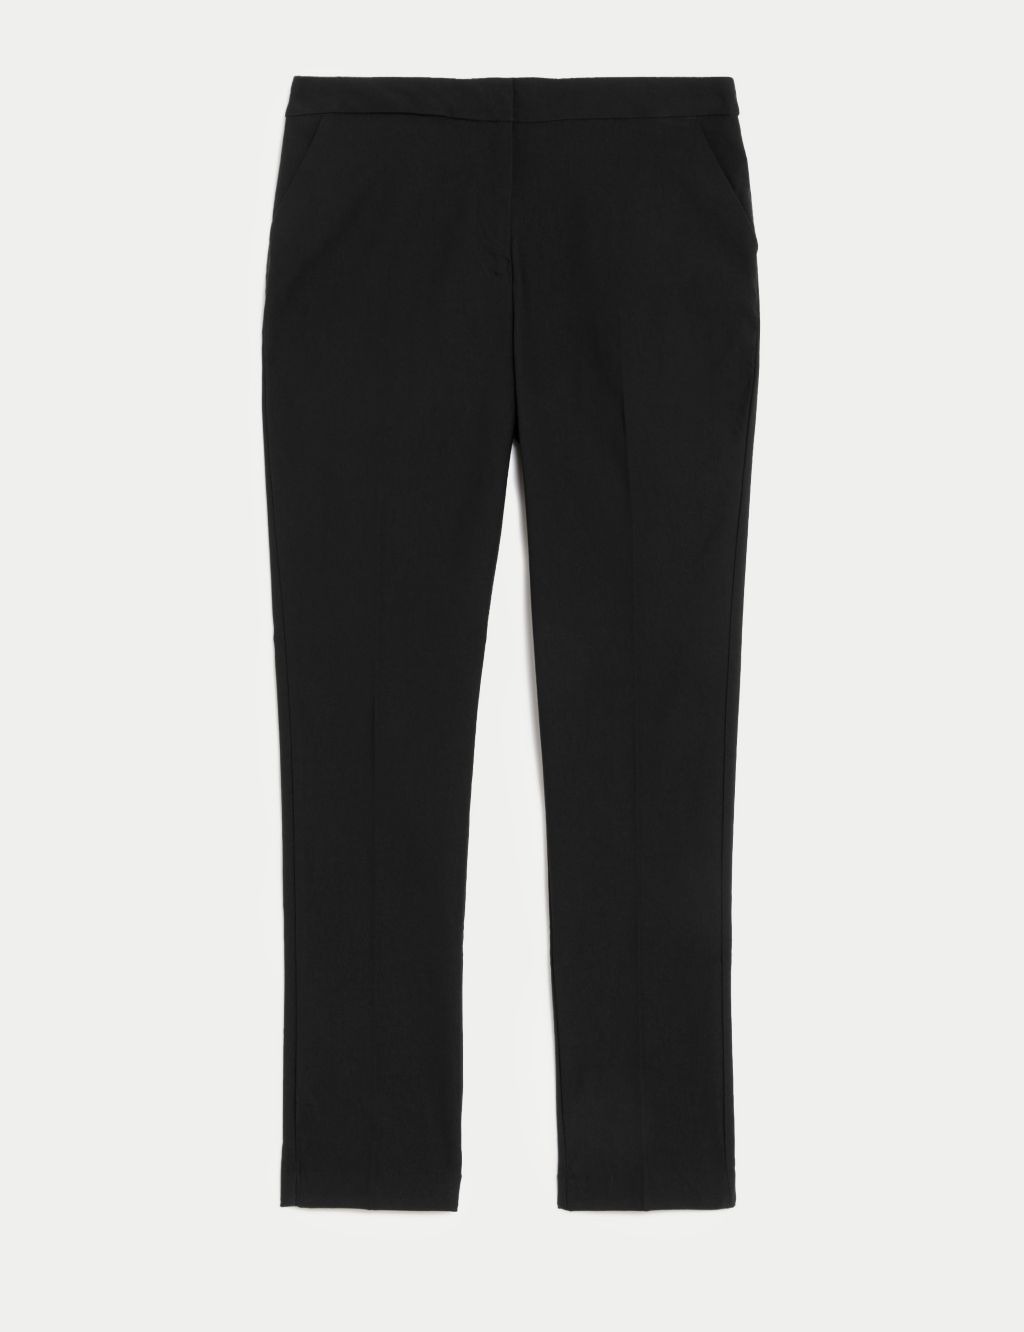 Girls' Super Skinny Extra Stretch SchoolTrousers (9-18 Yrs) image 2